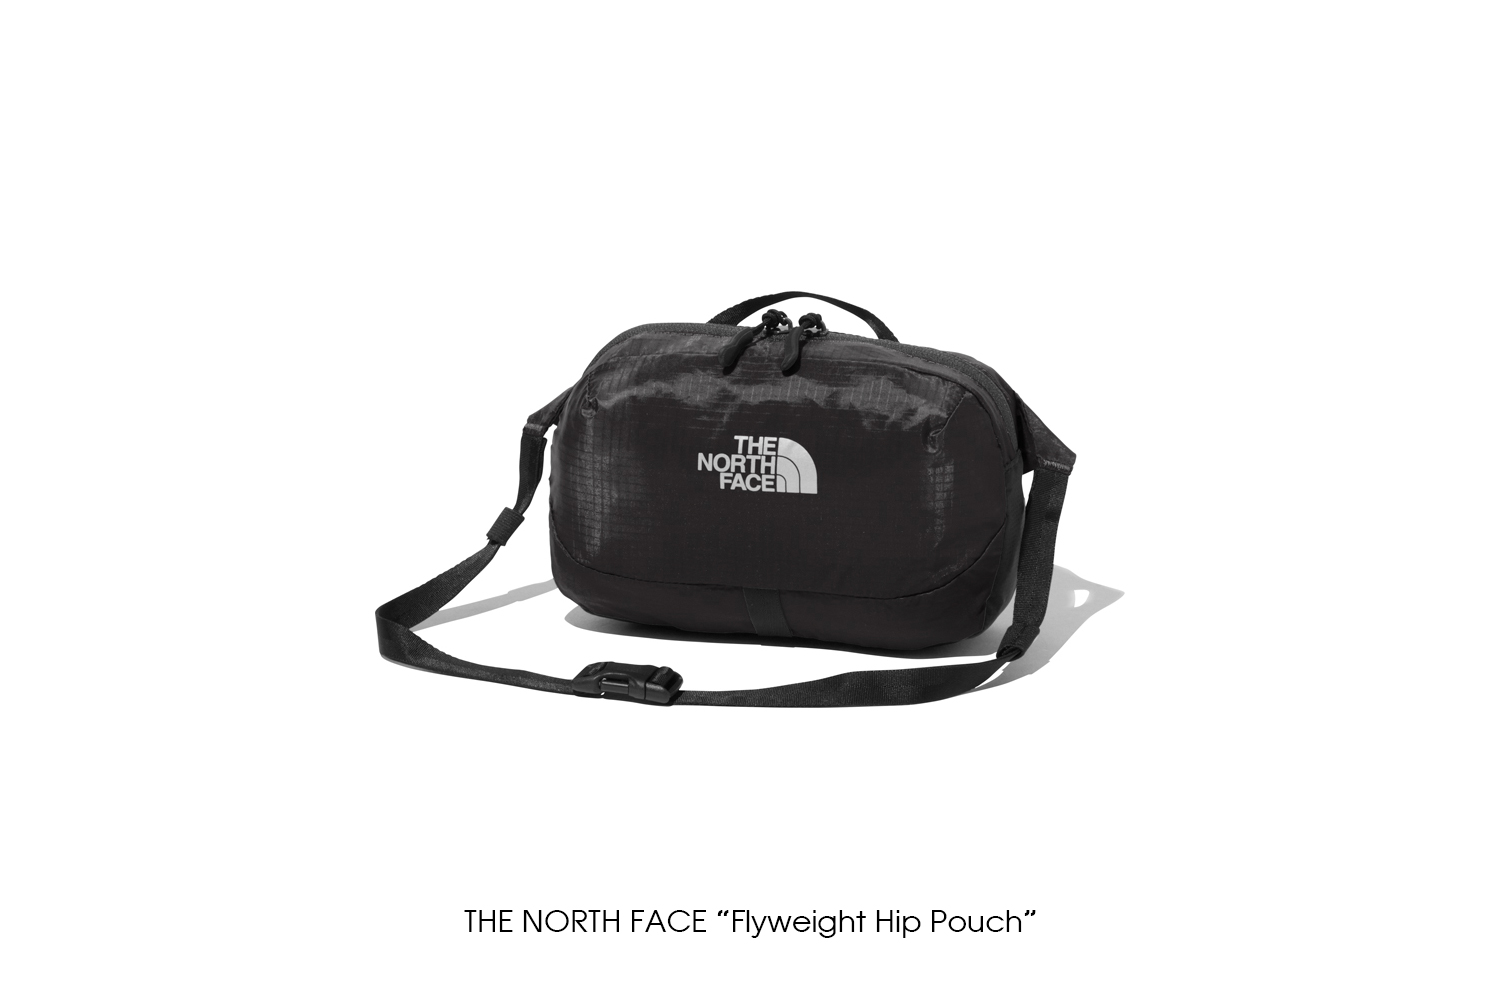 THE NORTH FACE "Flyweight Hip Pouch"